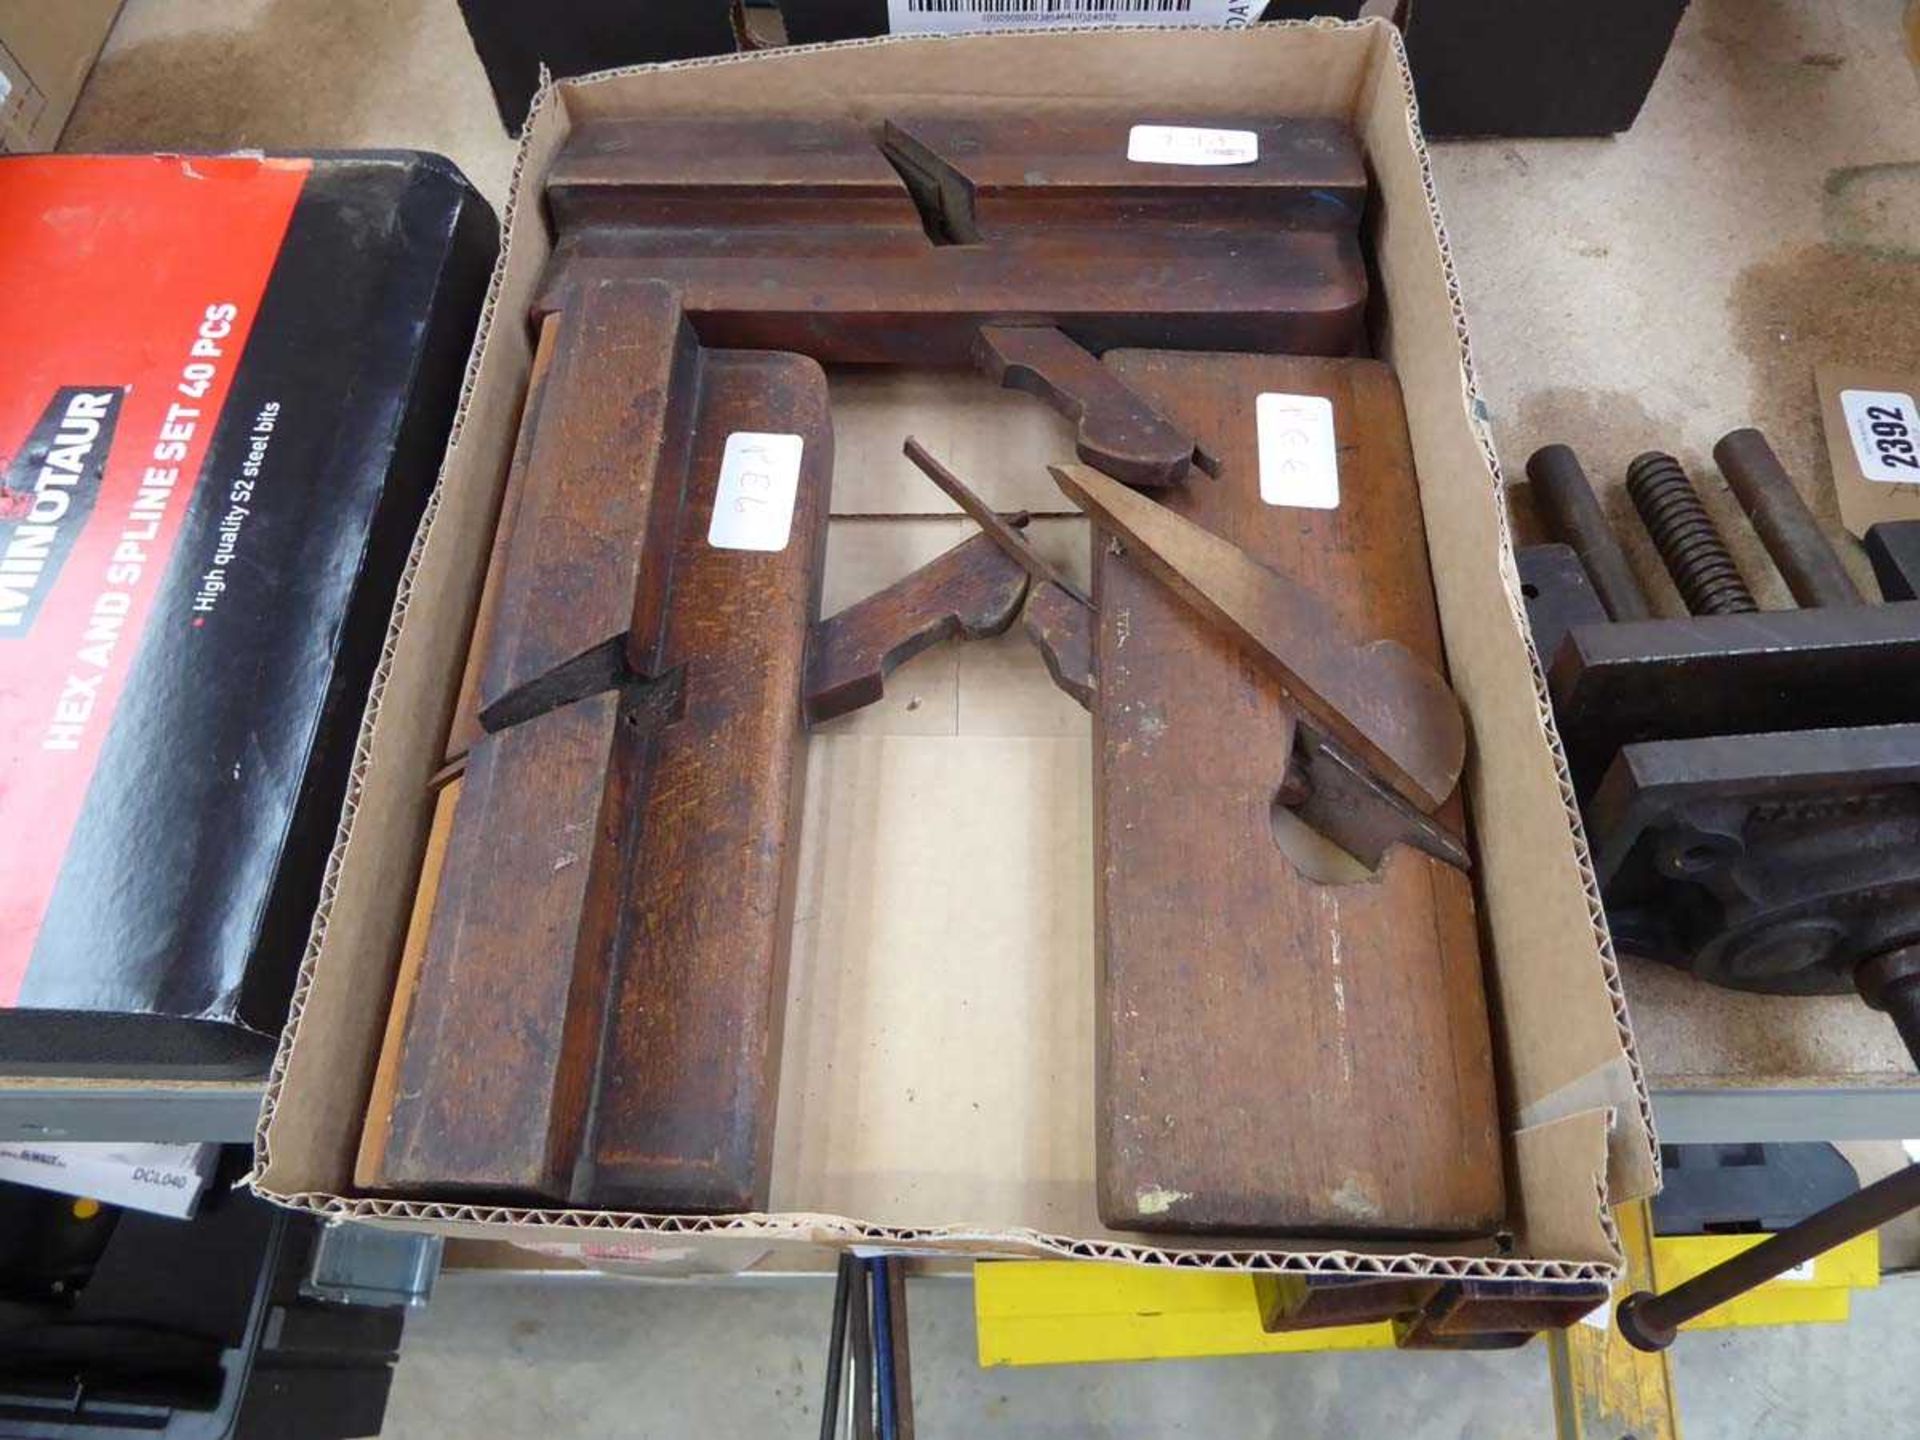 Shallow crate containing 3 vintage carpentry planes